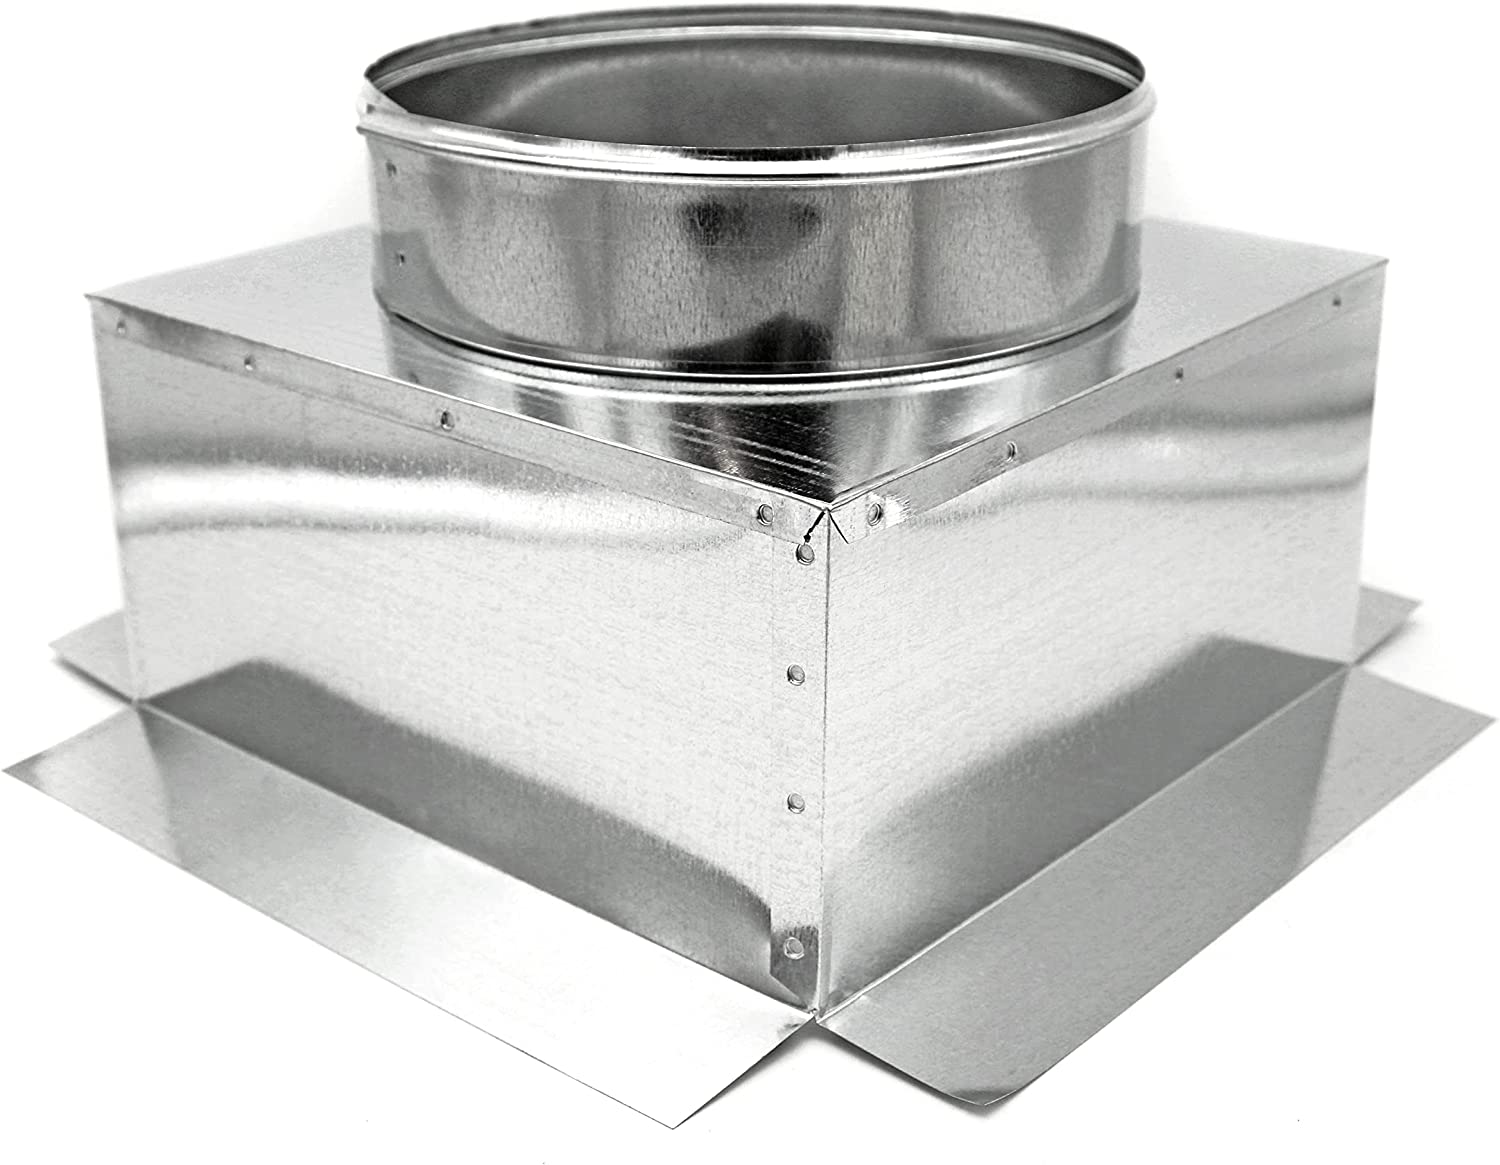 HVAC Plenum Ceiling Box | Top Ceiling Box | 10" X 10" X 10" Galvanized Steel Metal Ceiling Box is Compatible with Duct 10"